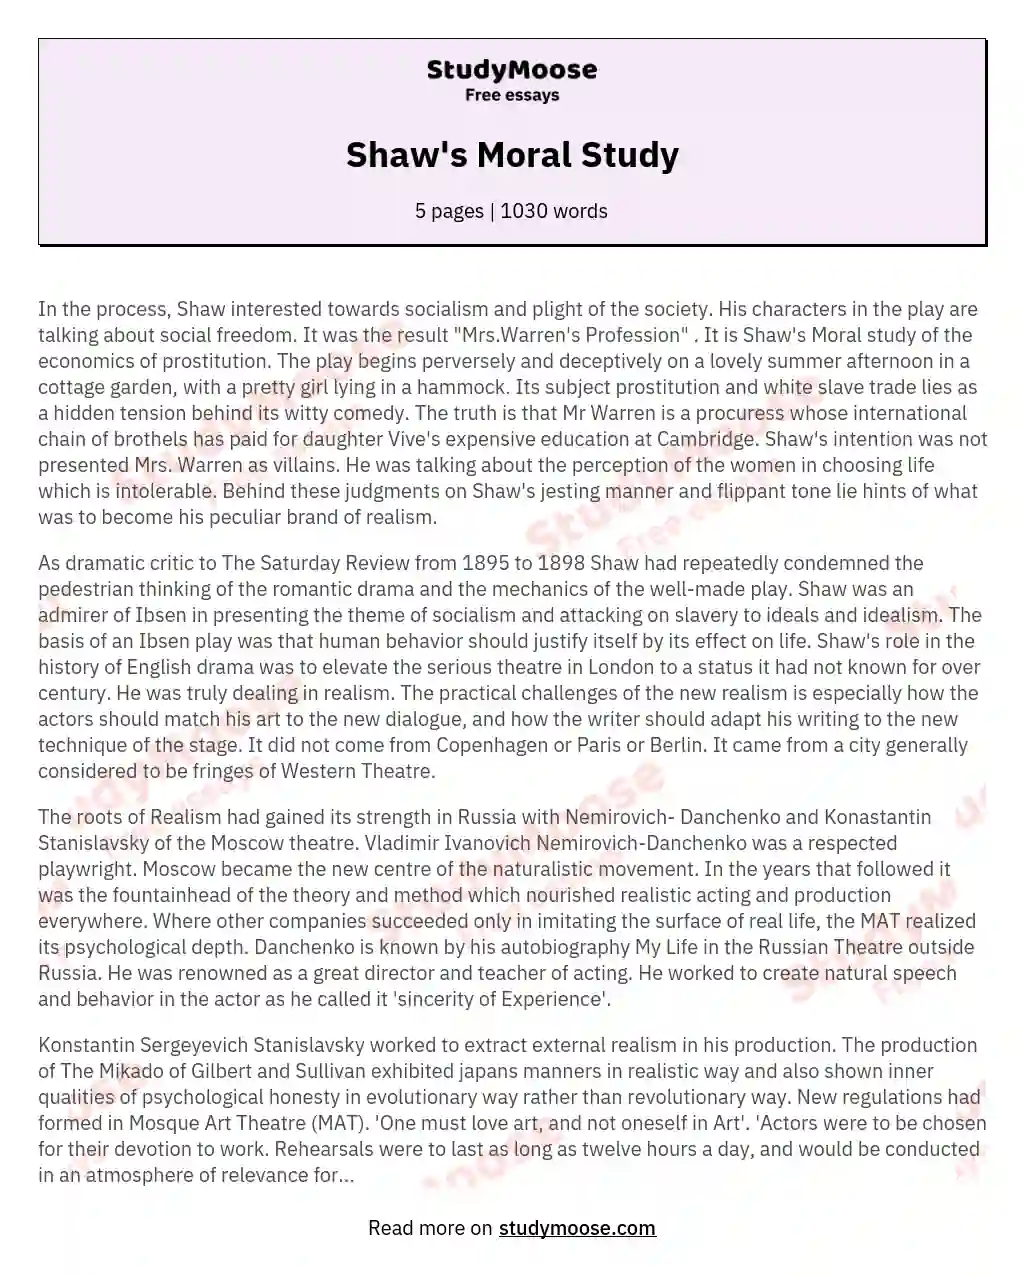 an essay about moral